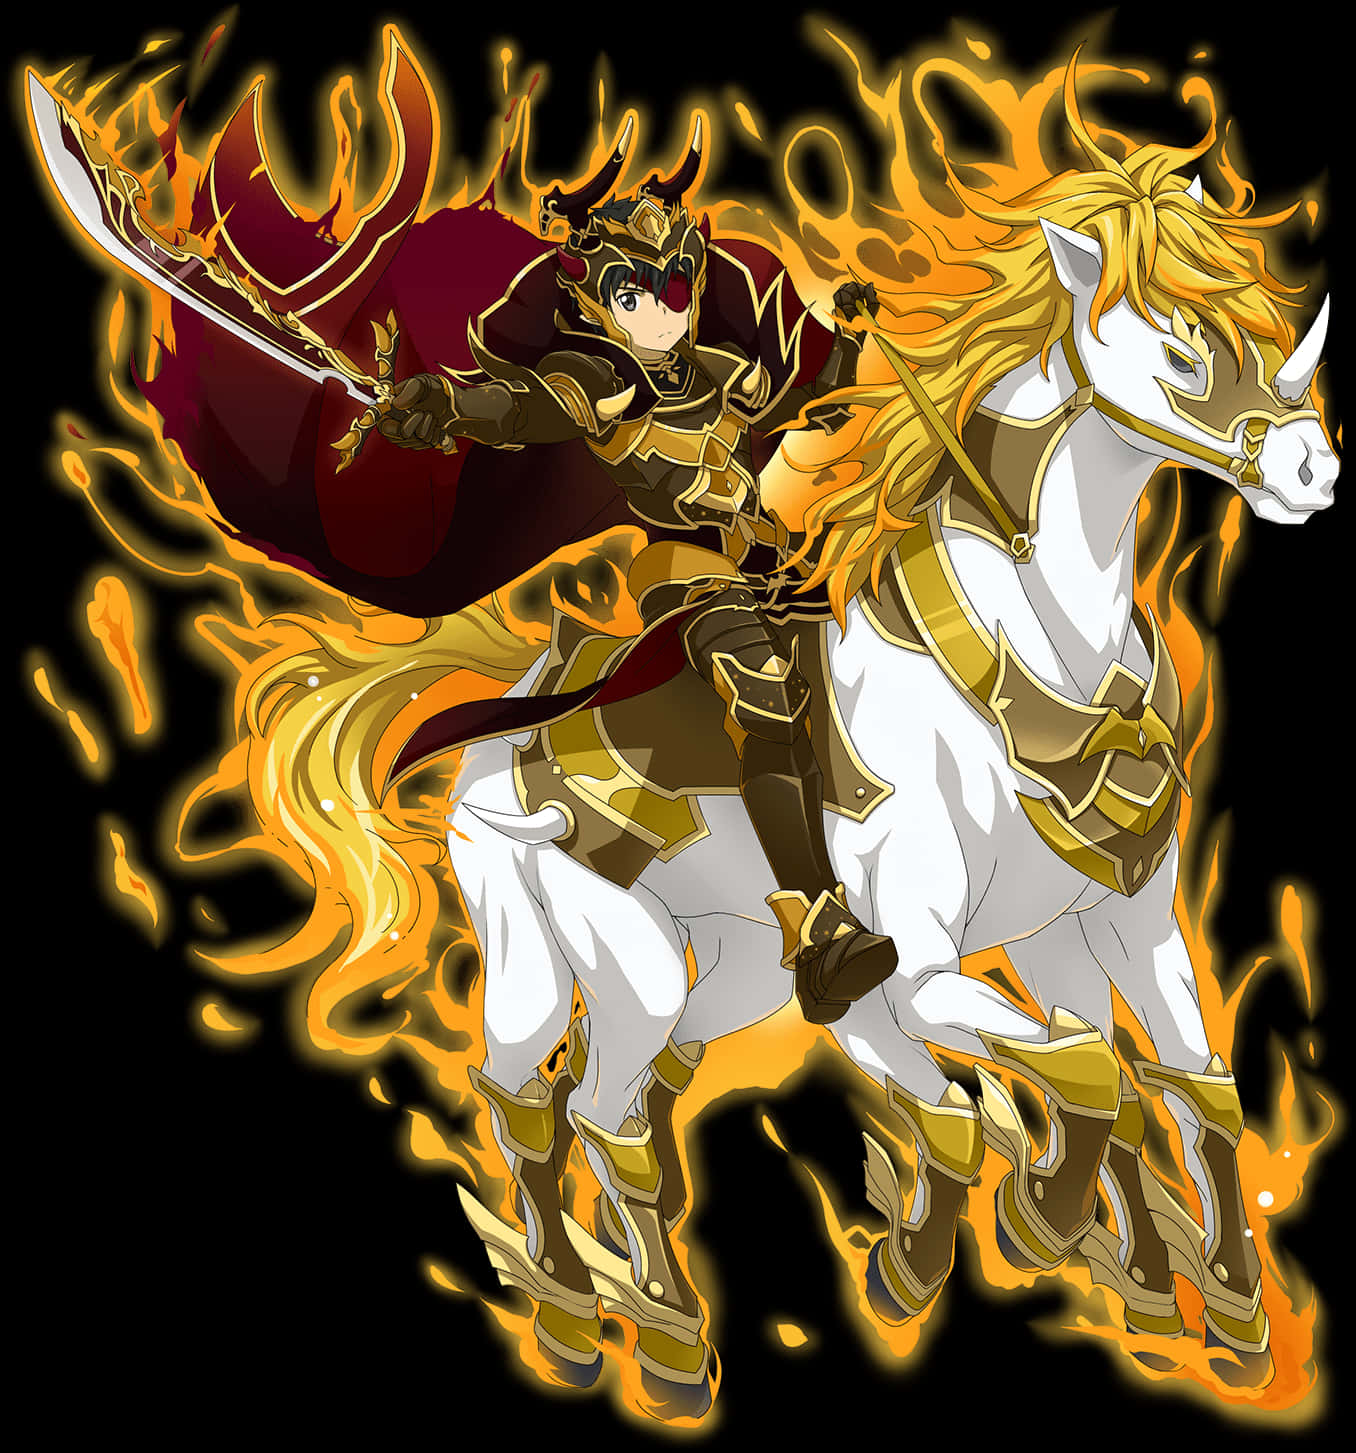 A Cartoon Of A Man Riding A Horse With Fire Flames